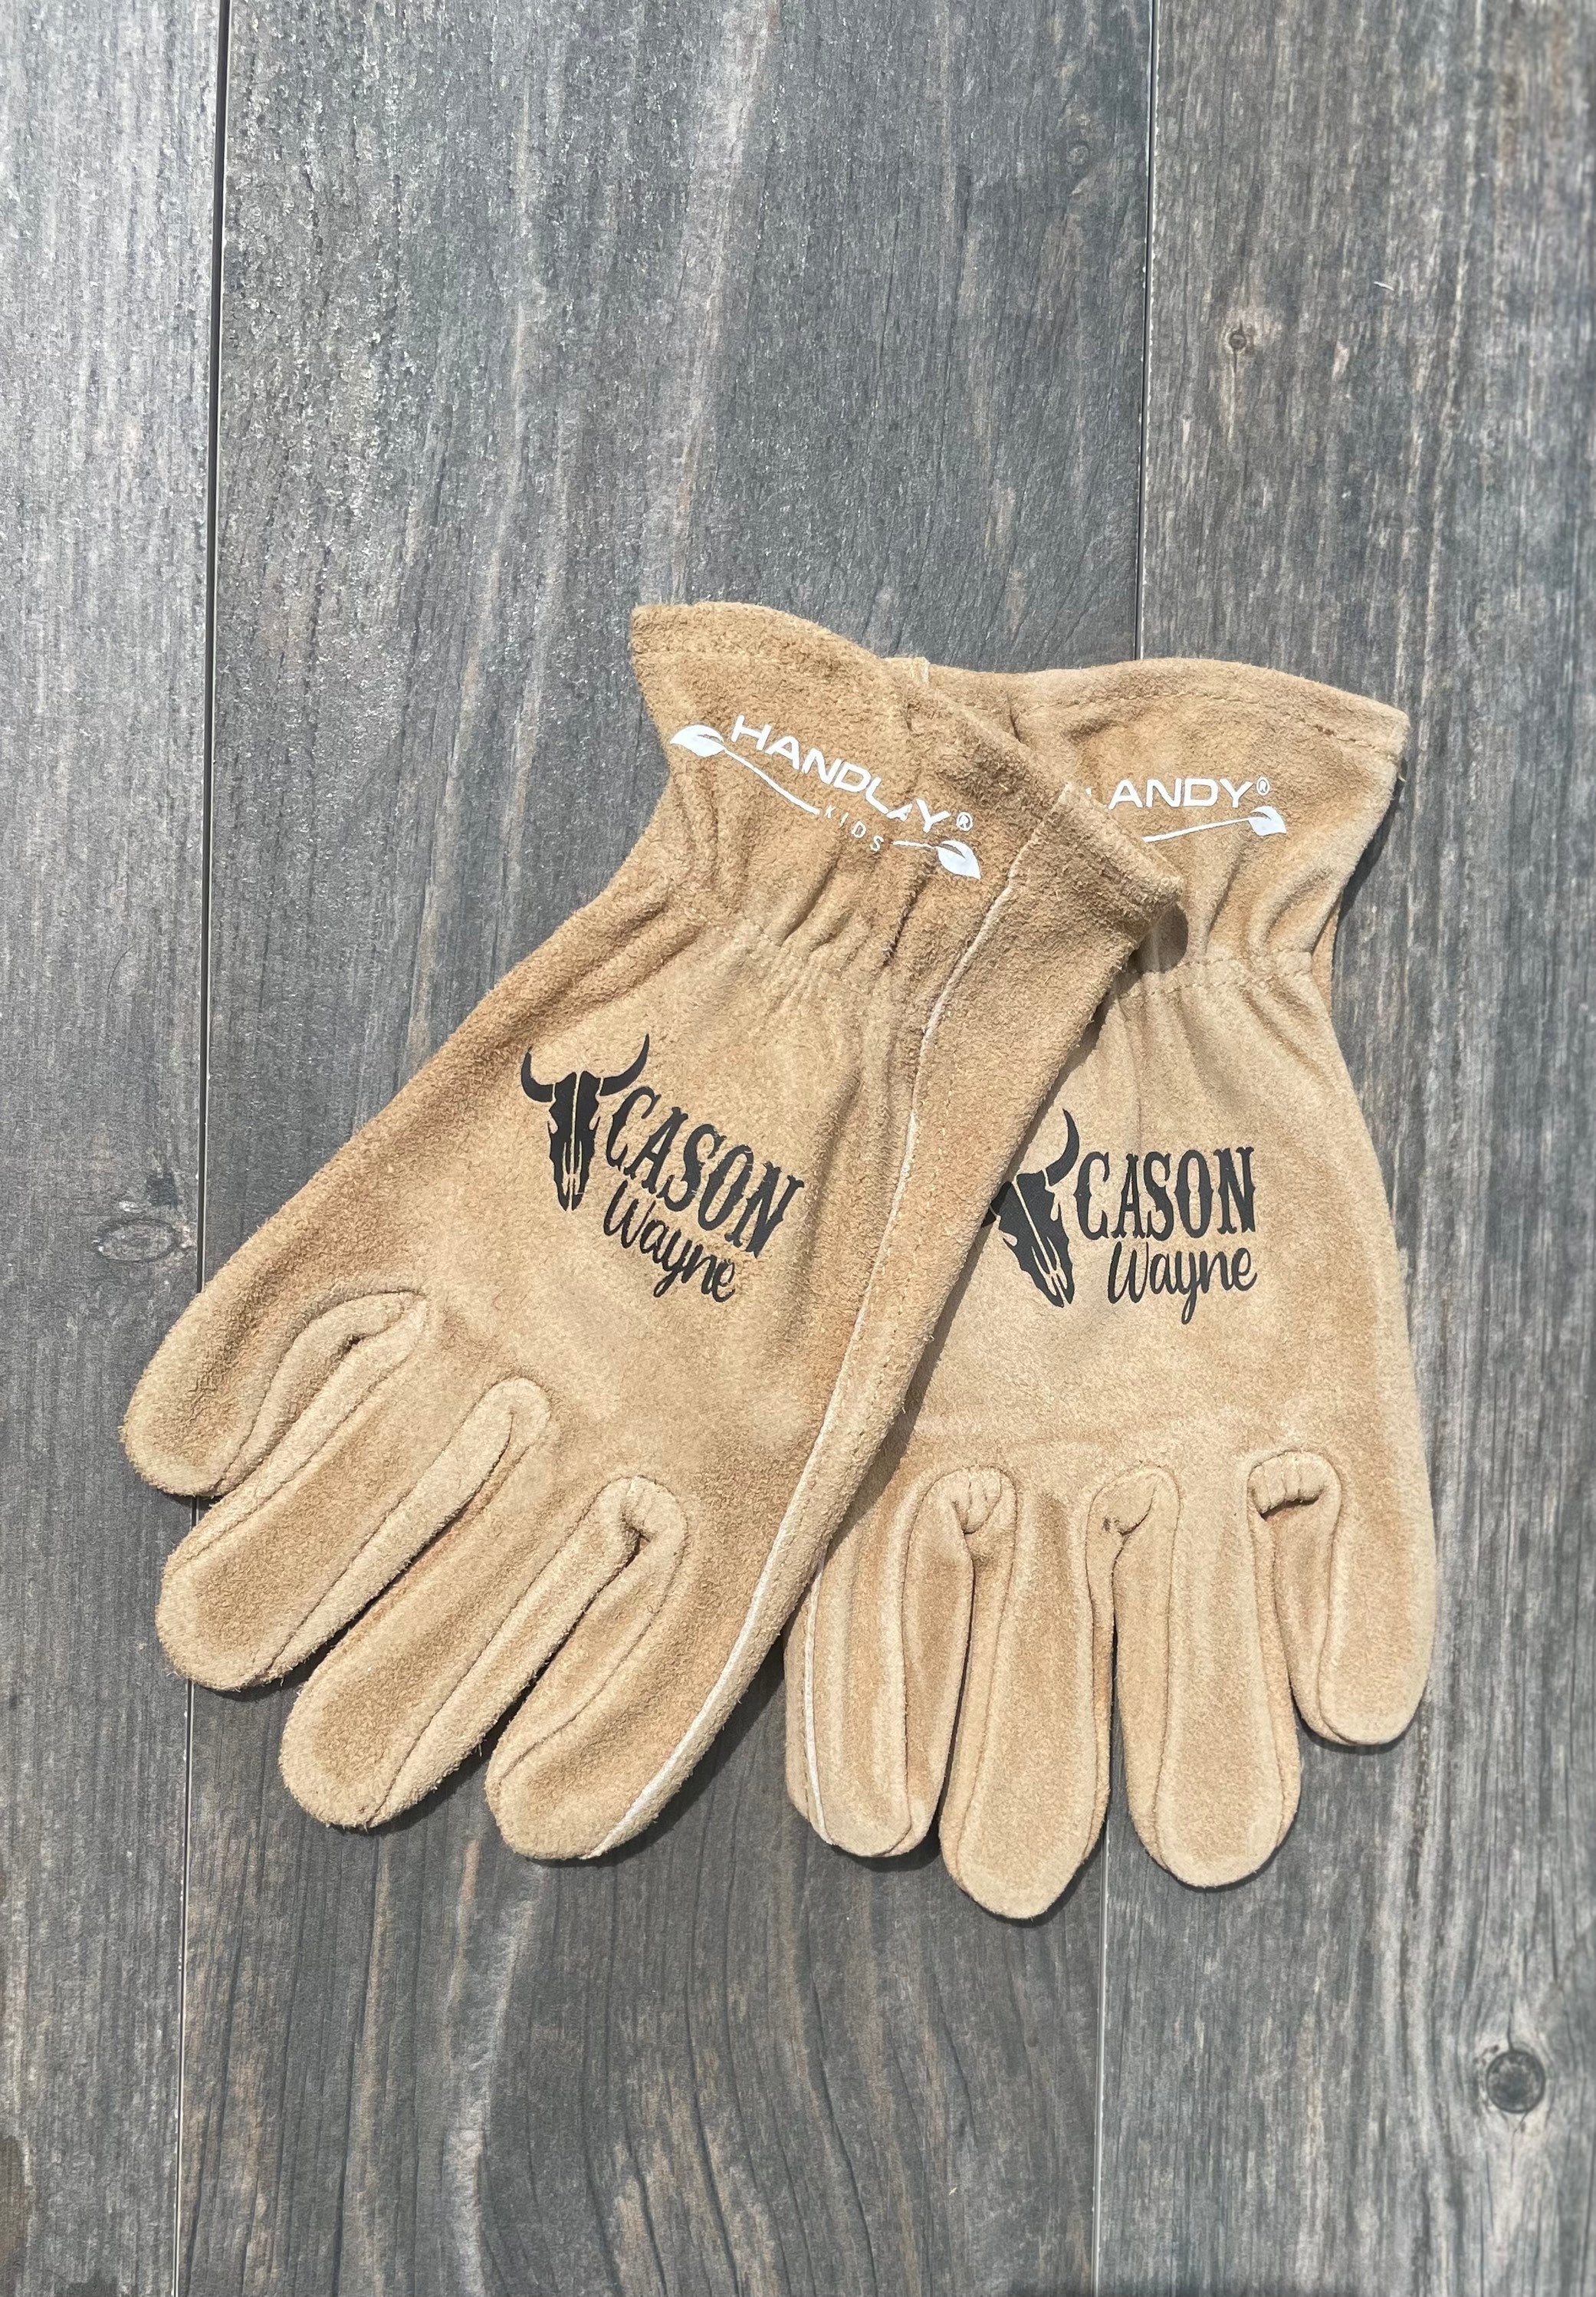 Personalized Leather Work Gloves: 'My Love' with a Pug Graphic